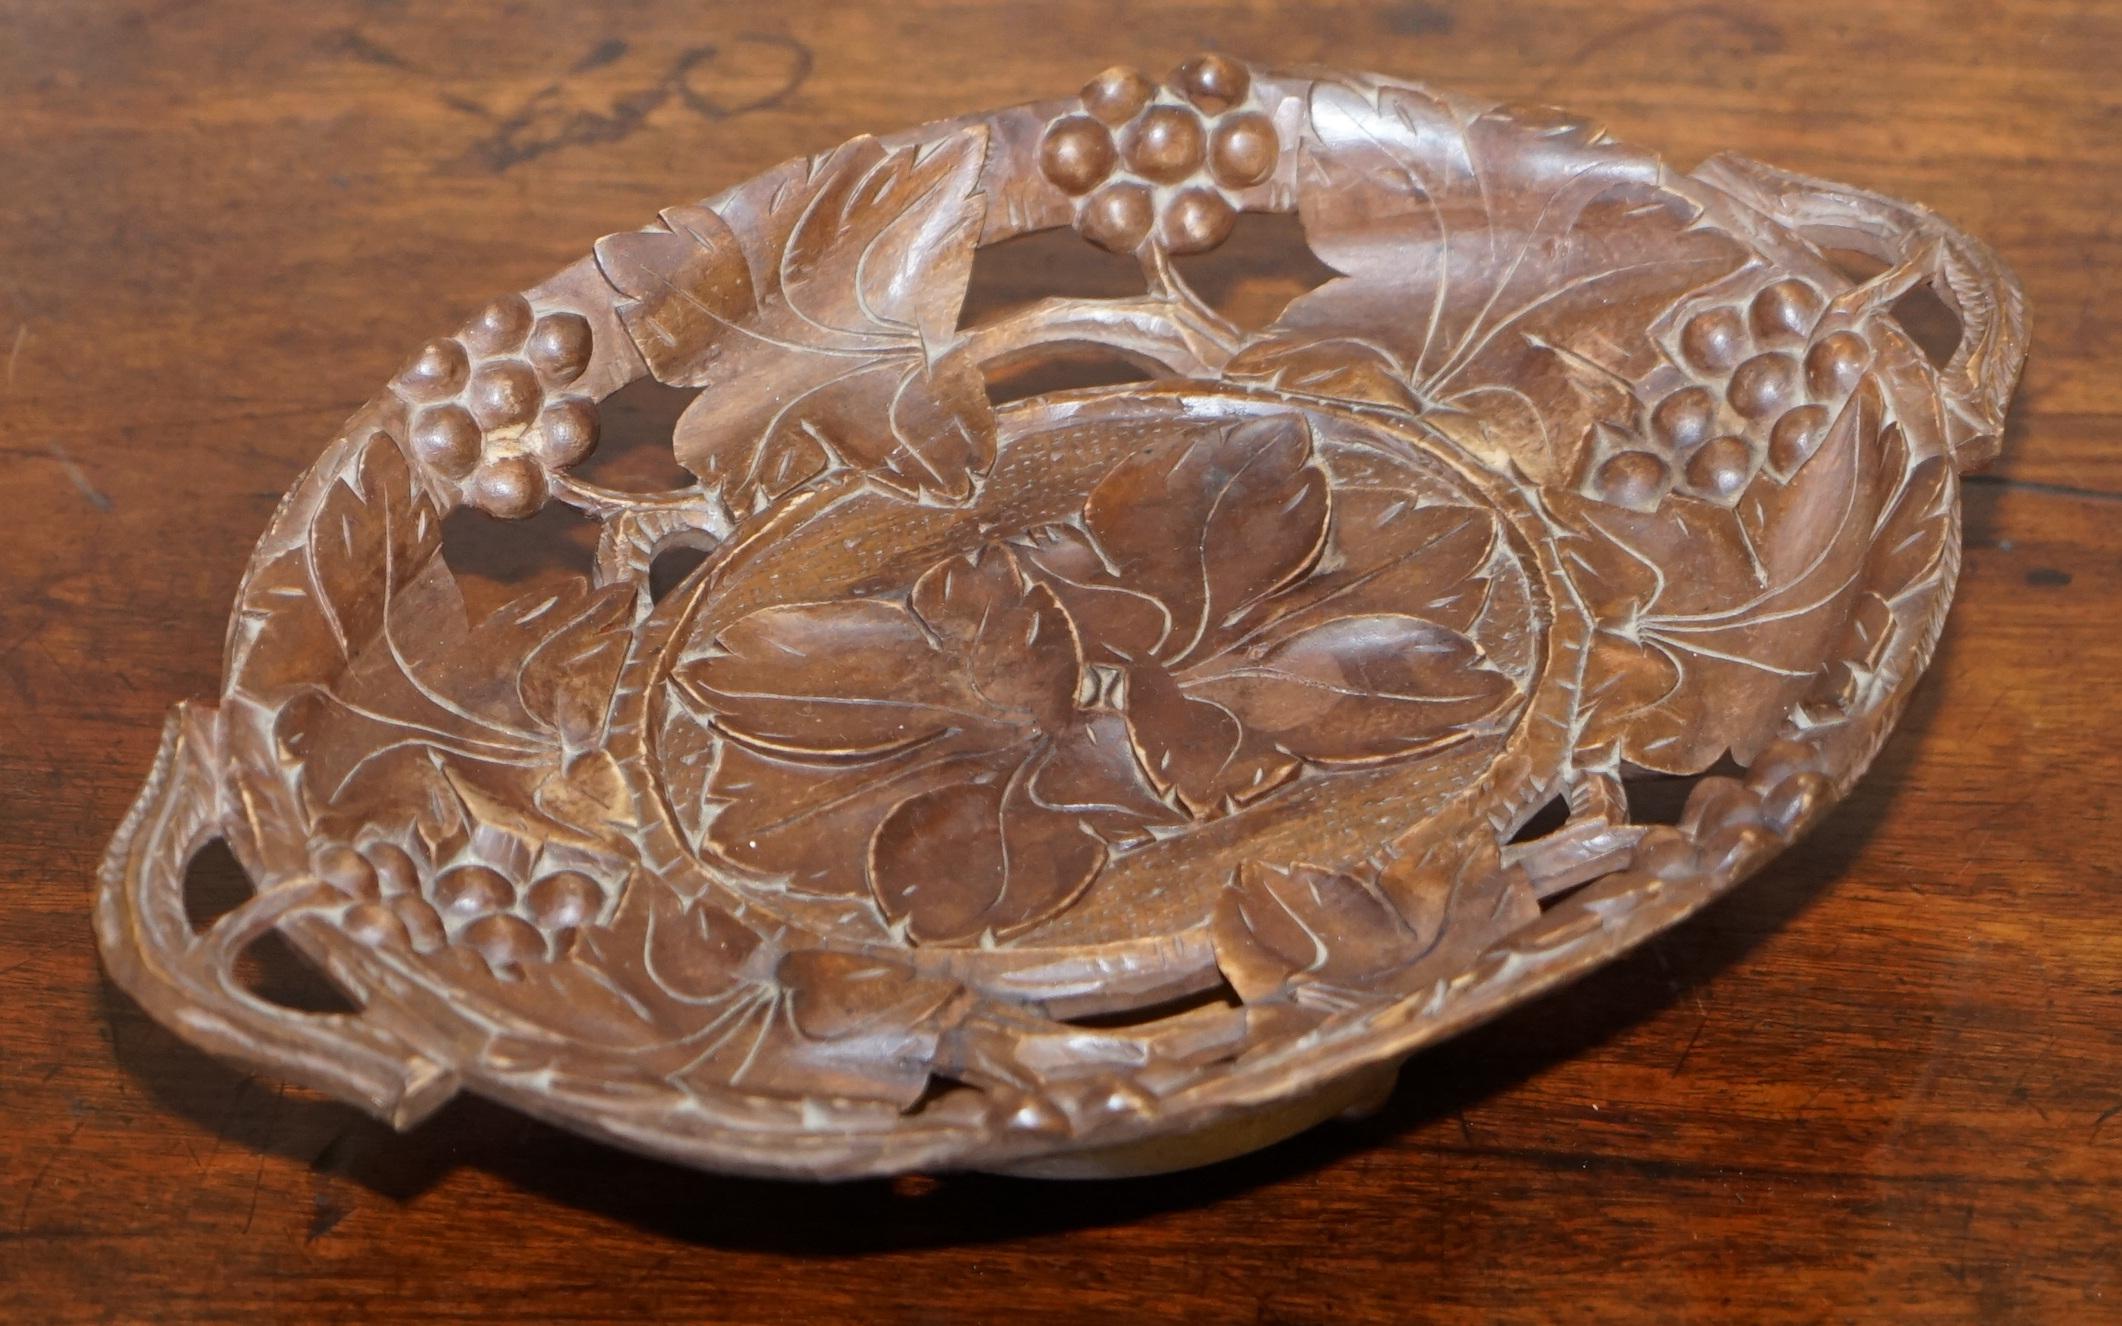 Wimbledon-Furniture

Wimbledon-Furniture is delighted to offer for sale this lovely black forest wood musical hand carved fruit bowl dish

A good looking and decorative piece, made really like a fruit bowl but most just use it to look good and